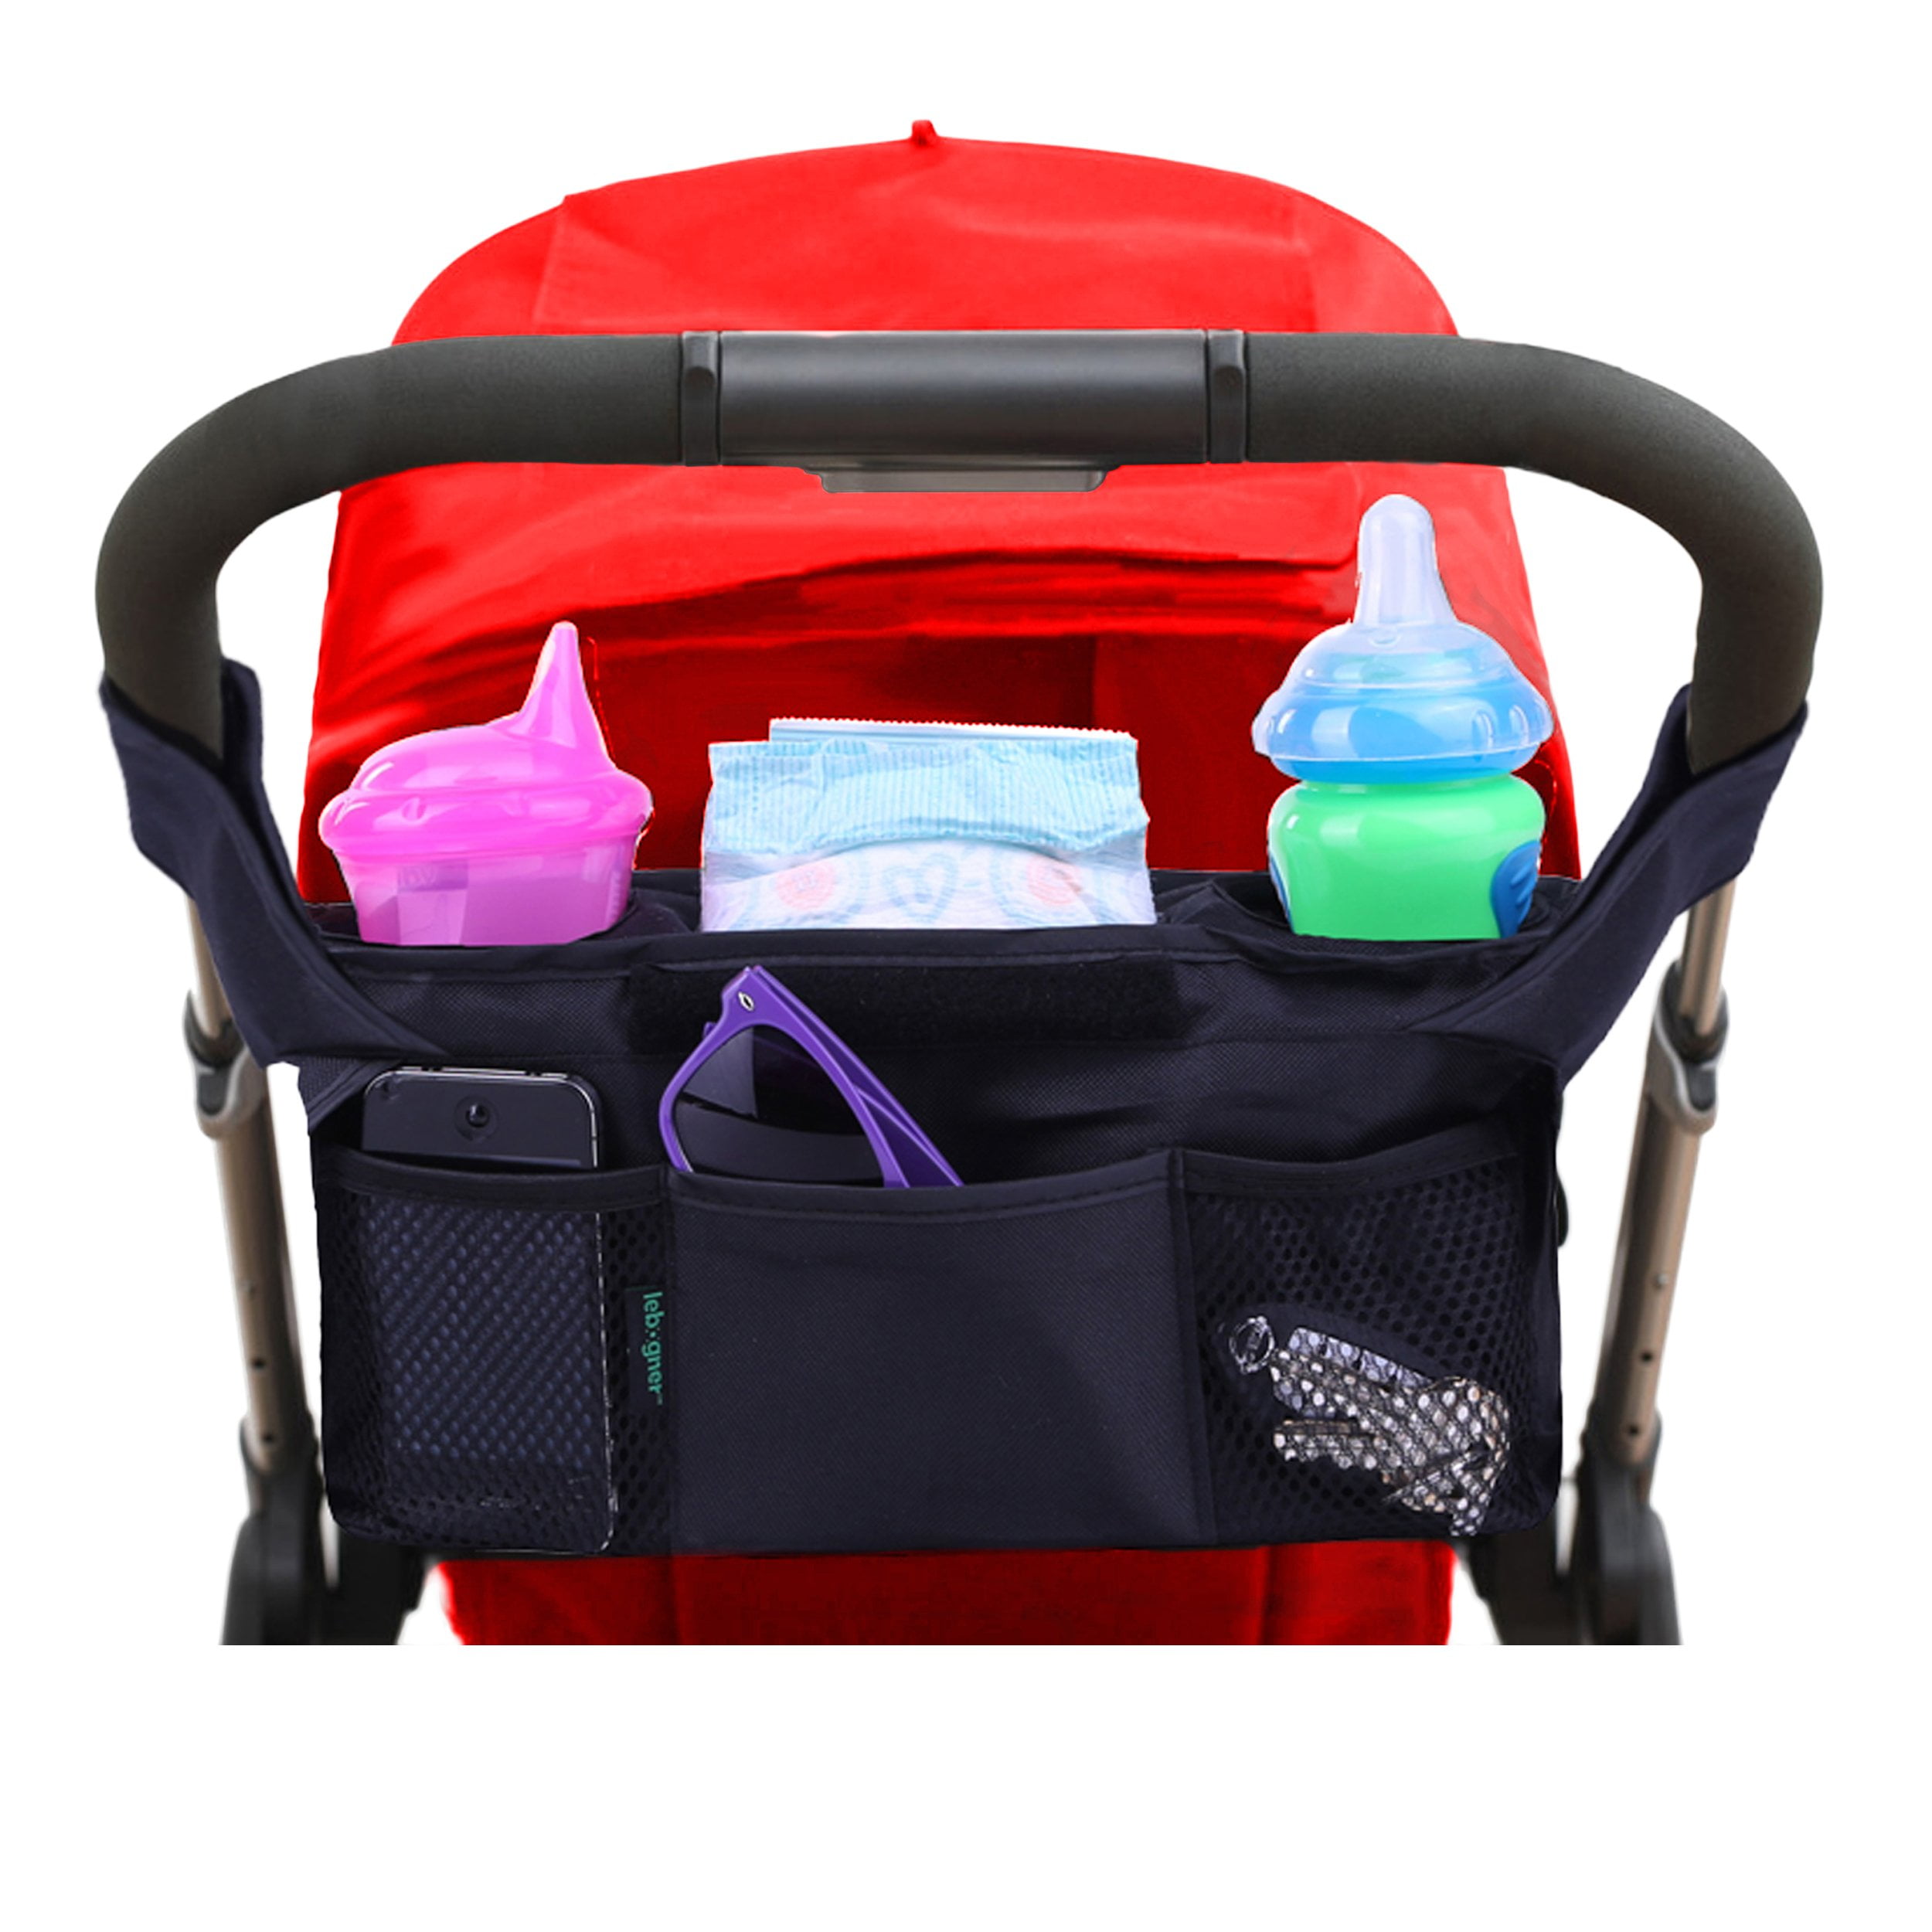 Baby Stroller Organizer Bag With Insulated Cup Holders Large Capacity Bags 